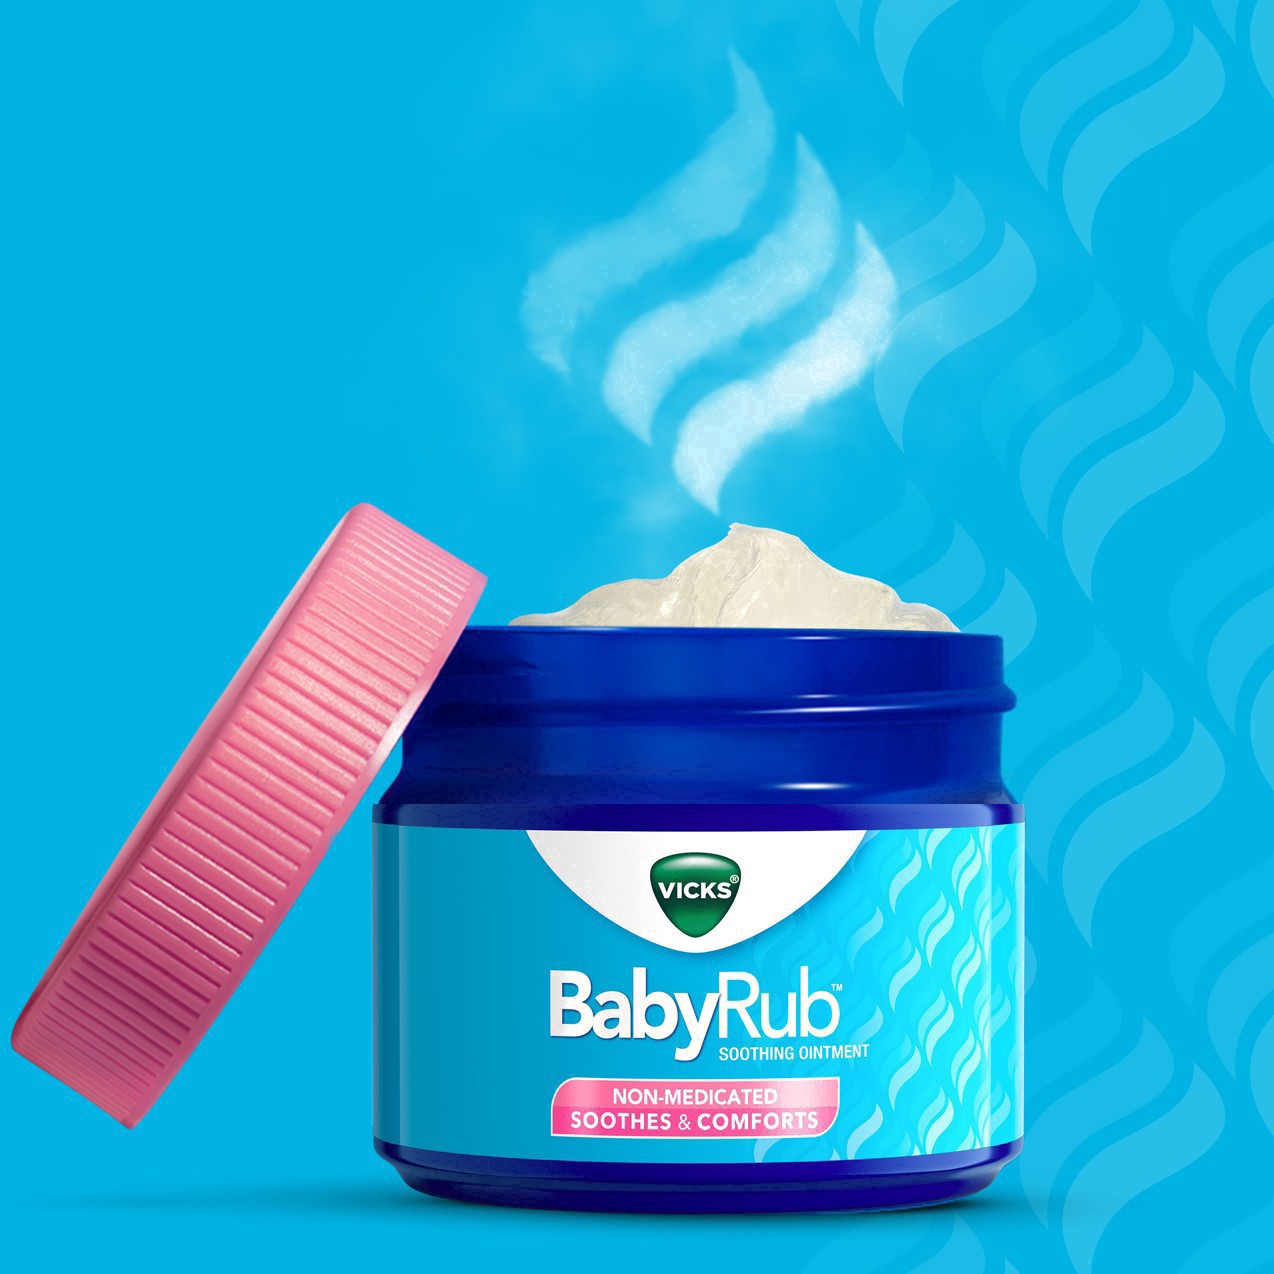 slide 8 of 78, Vicks BabyRub, Chest Rub Ointment with Soothing Aloe, Eucalyptus, Lavender, and Rosemary, from The Makers of VapoRub, 1.76 oz, 1.76 oz